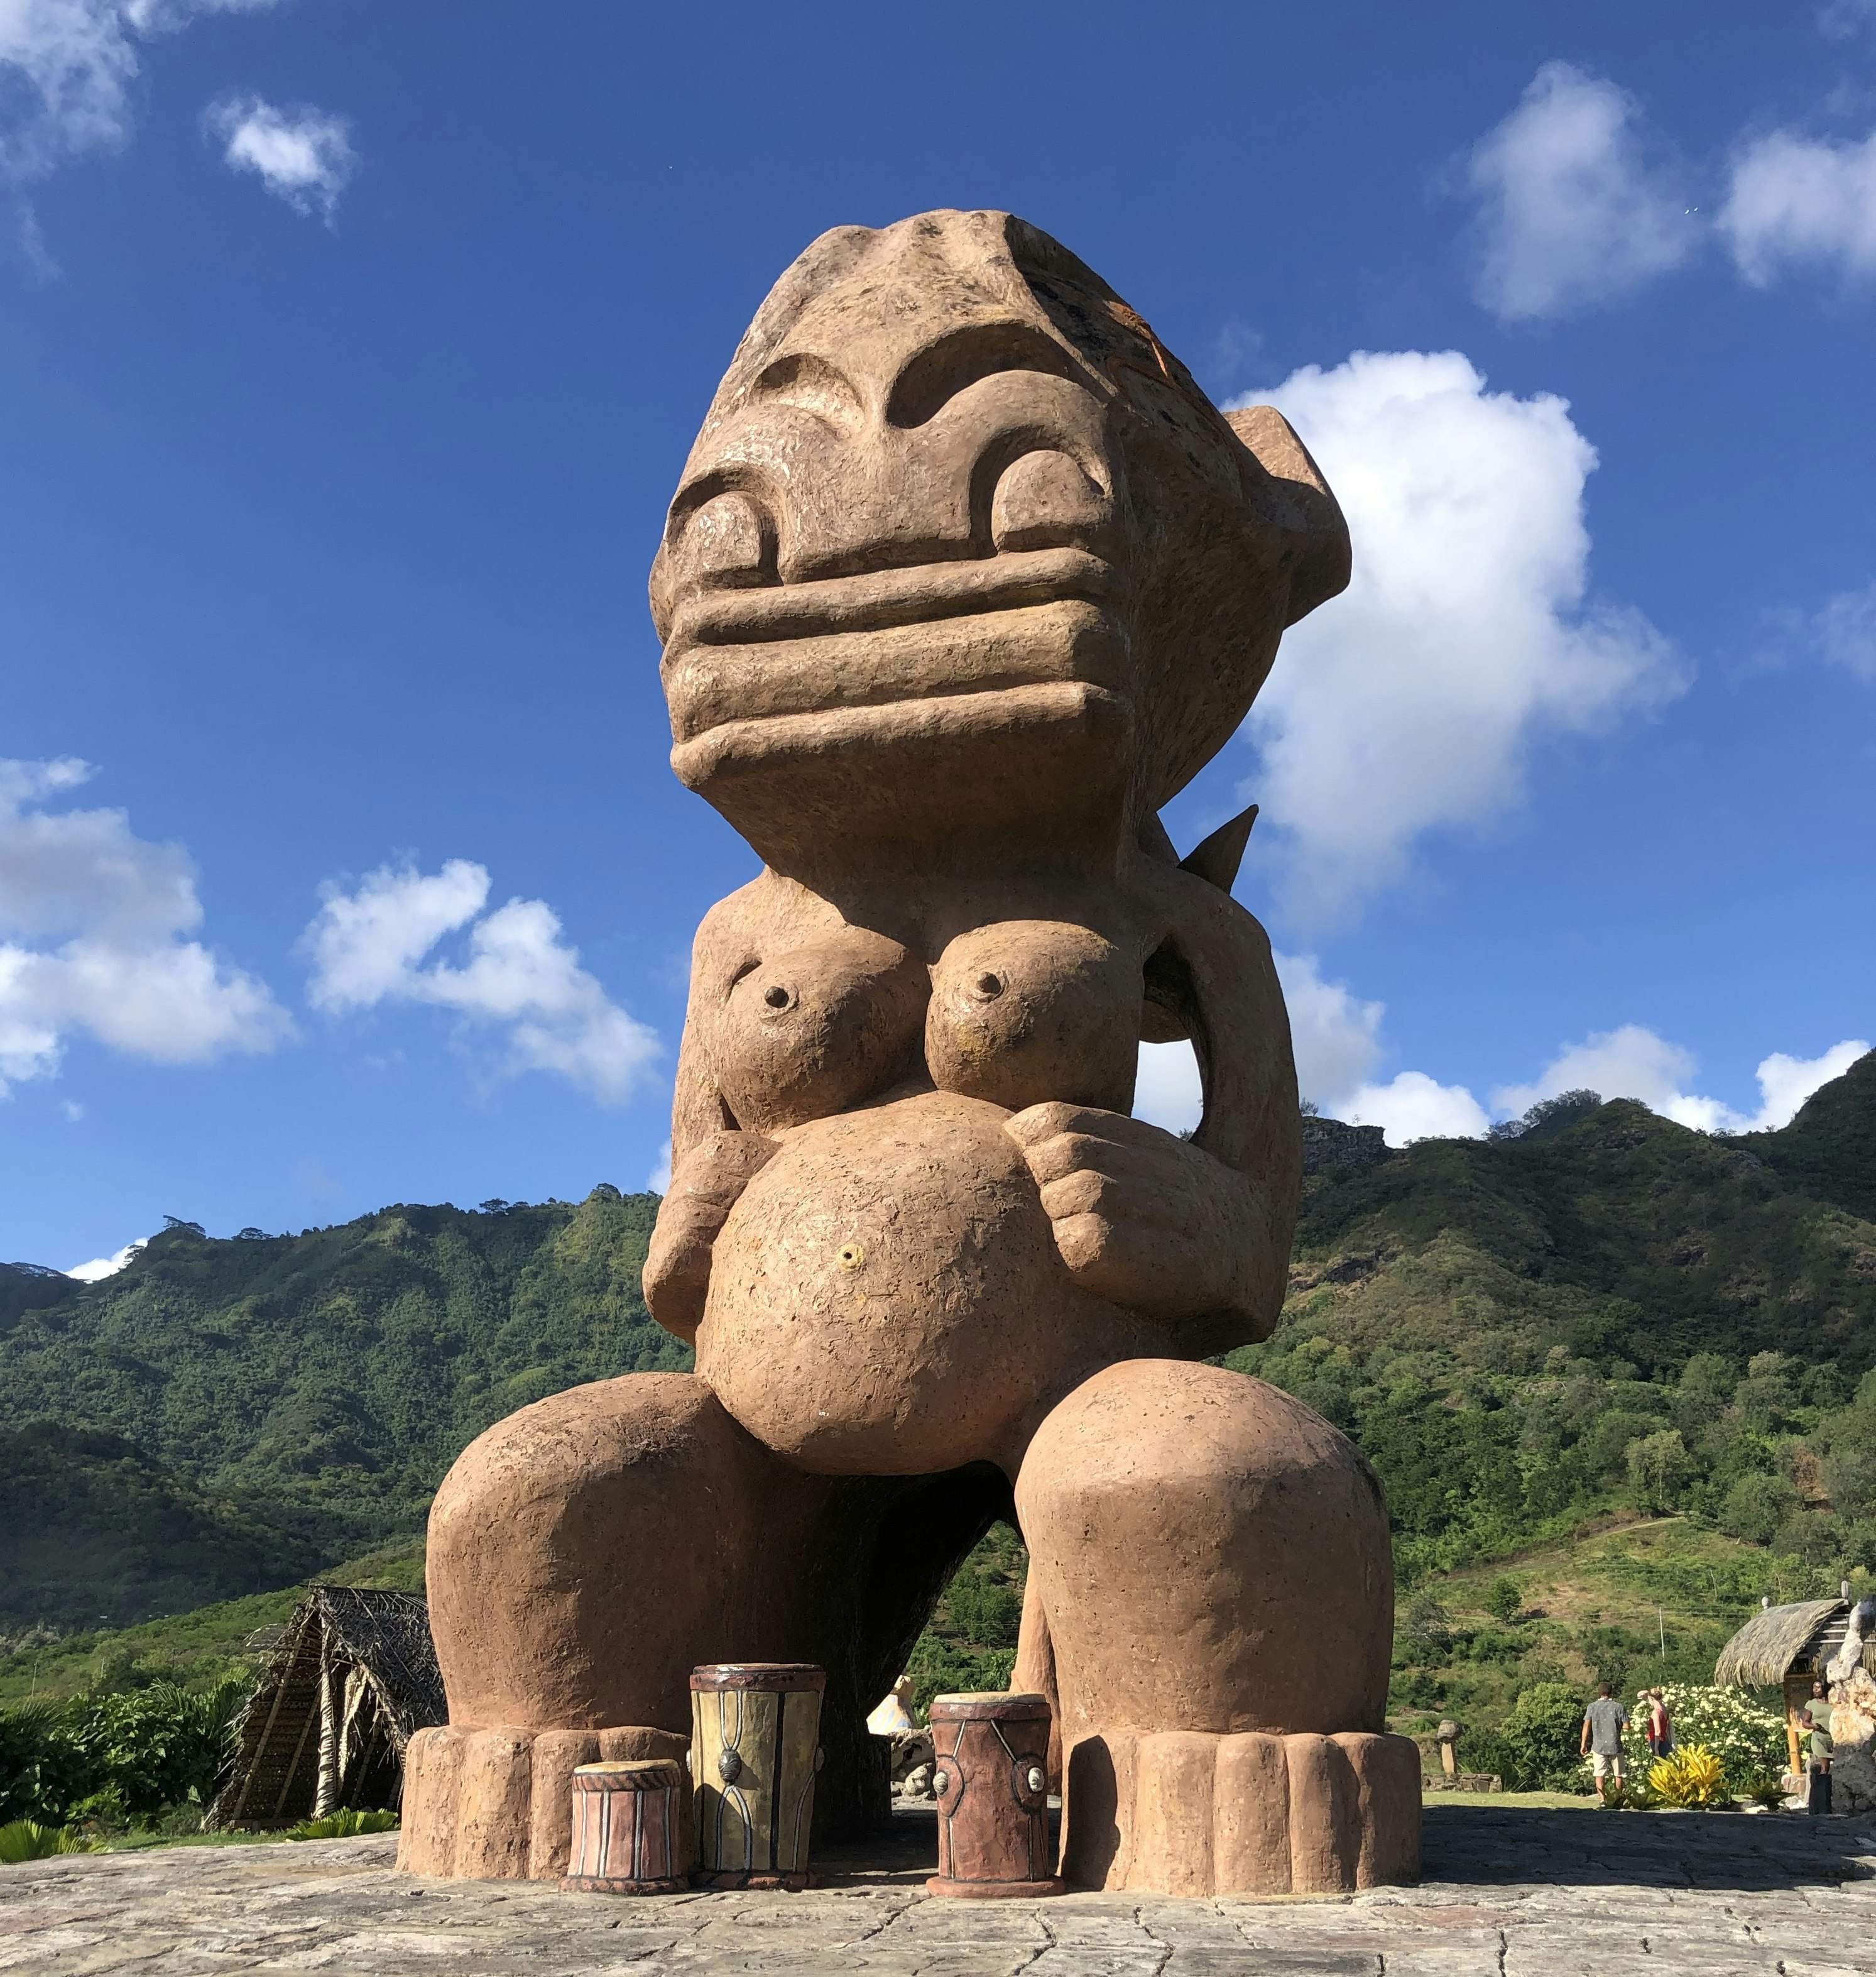 A huge wooden statue dominates the skyline in Nuku Hiva